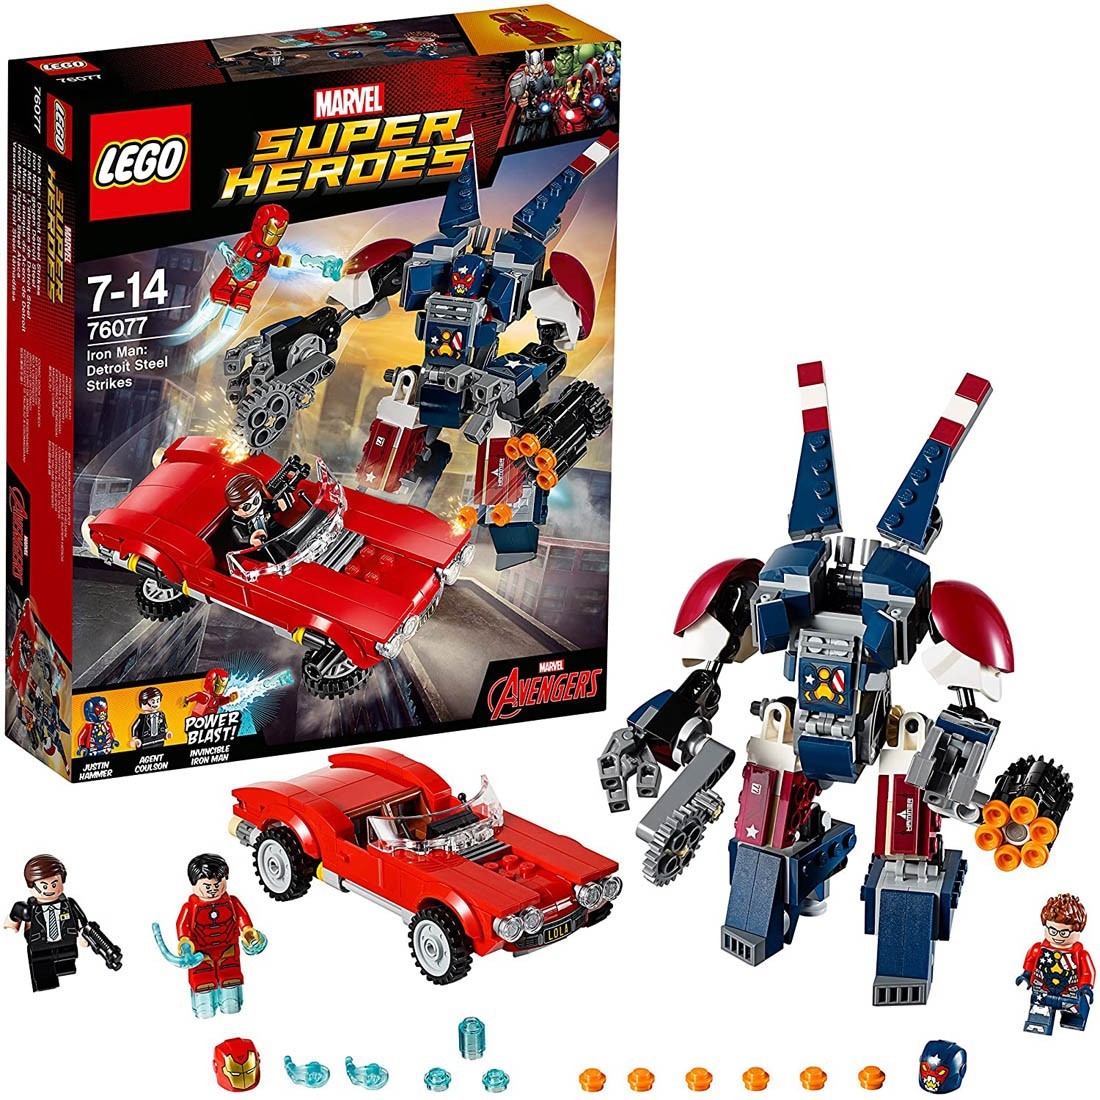 Buy Super Heroes Spider-Man: Web Warriors Ultimate Bridge Battle - Lego, delivered to your home | TheOutfit